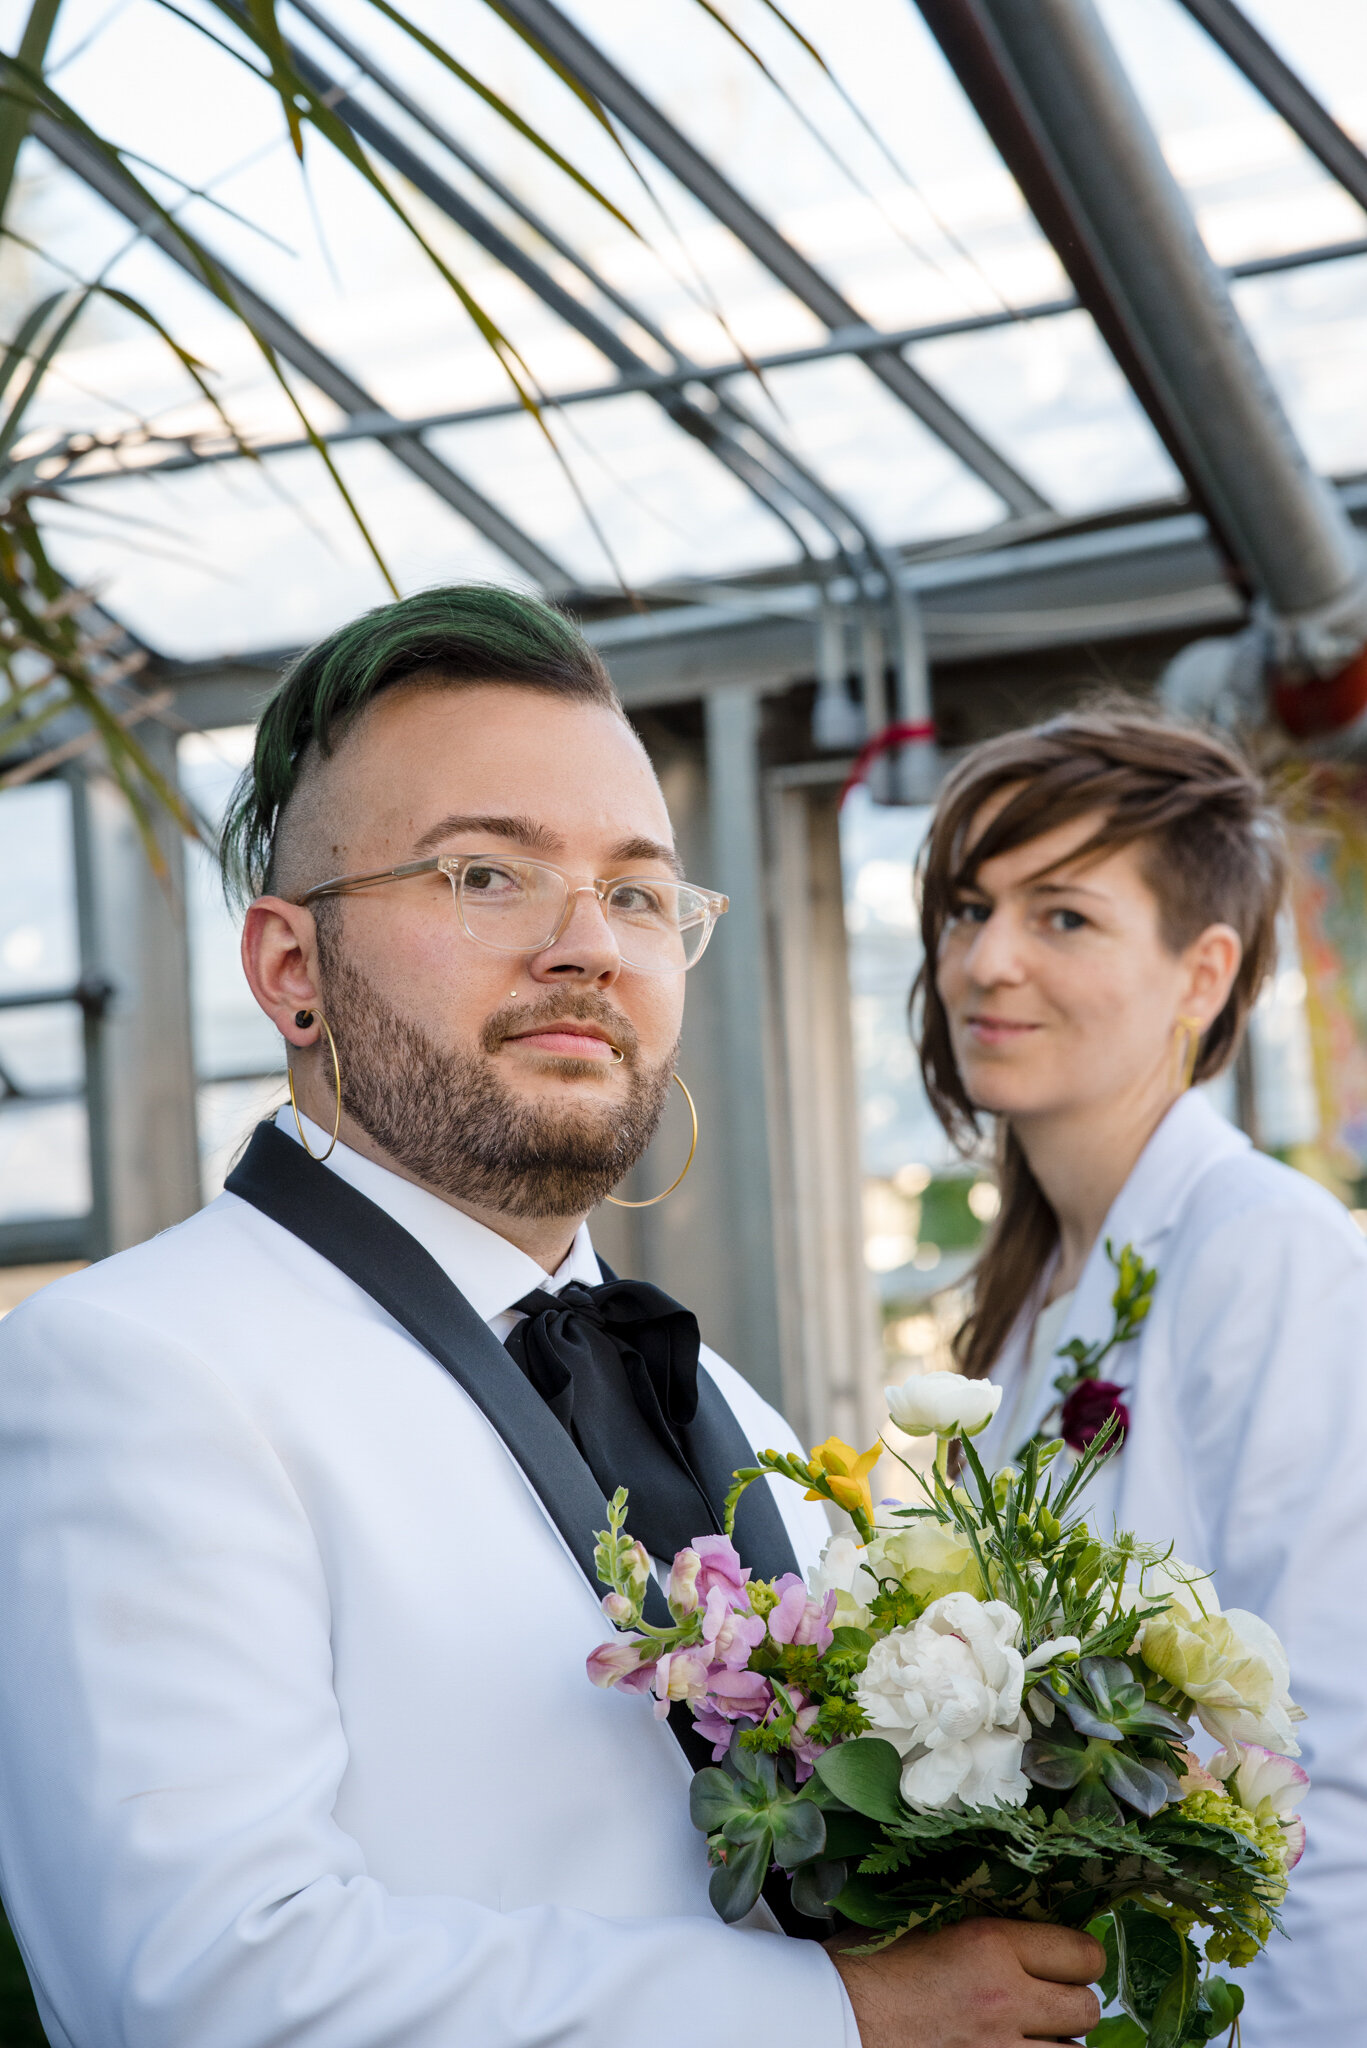 Marriers in white suits in greenhouse after ceremony at Roger Williams Botanical Center Providence Rhode Island Michelle Schapiro New England Photographer